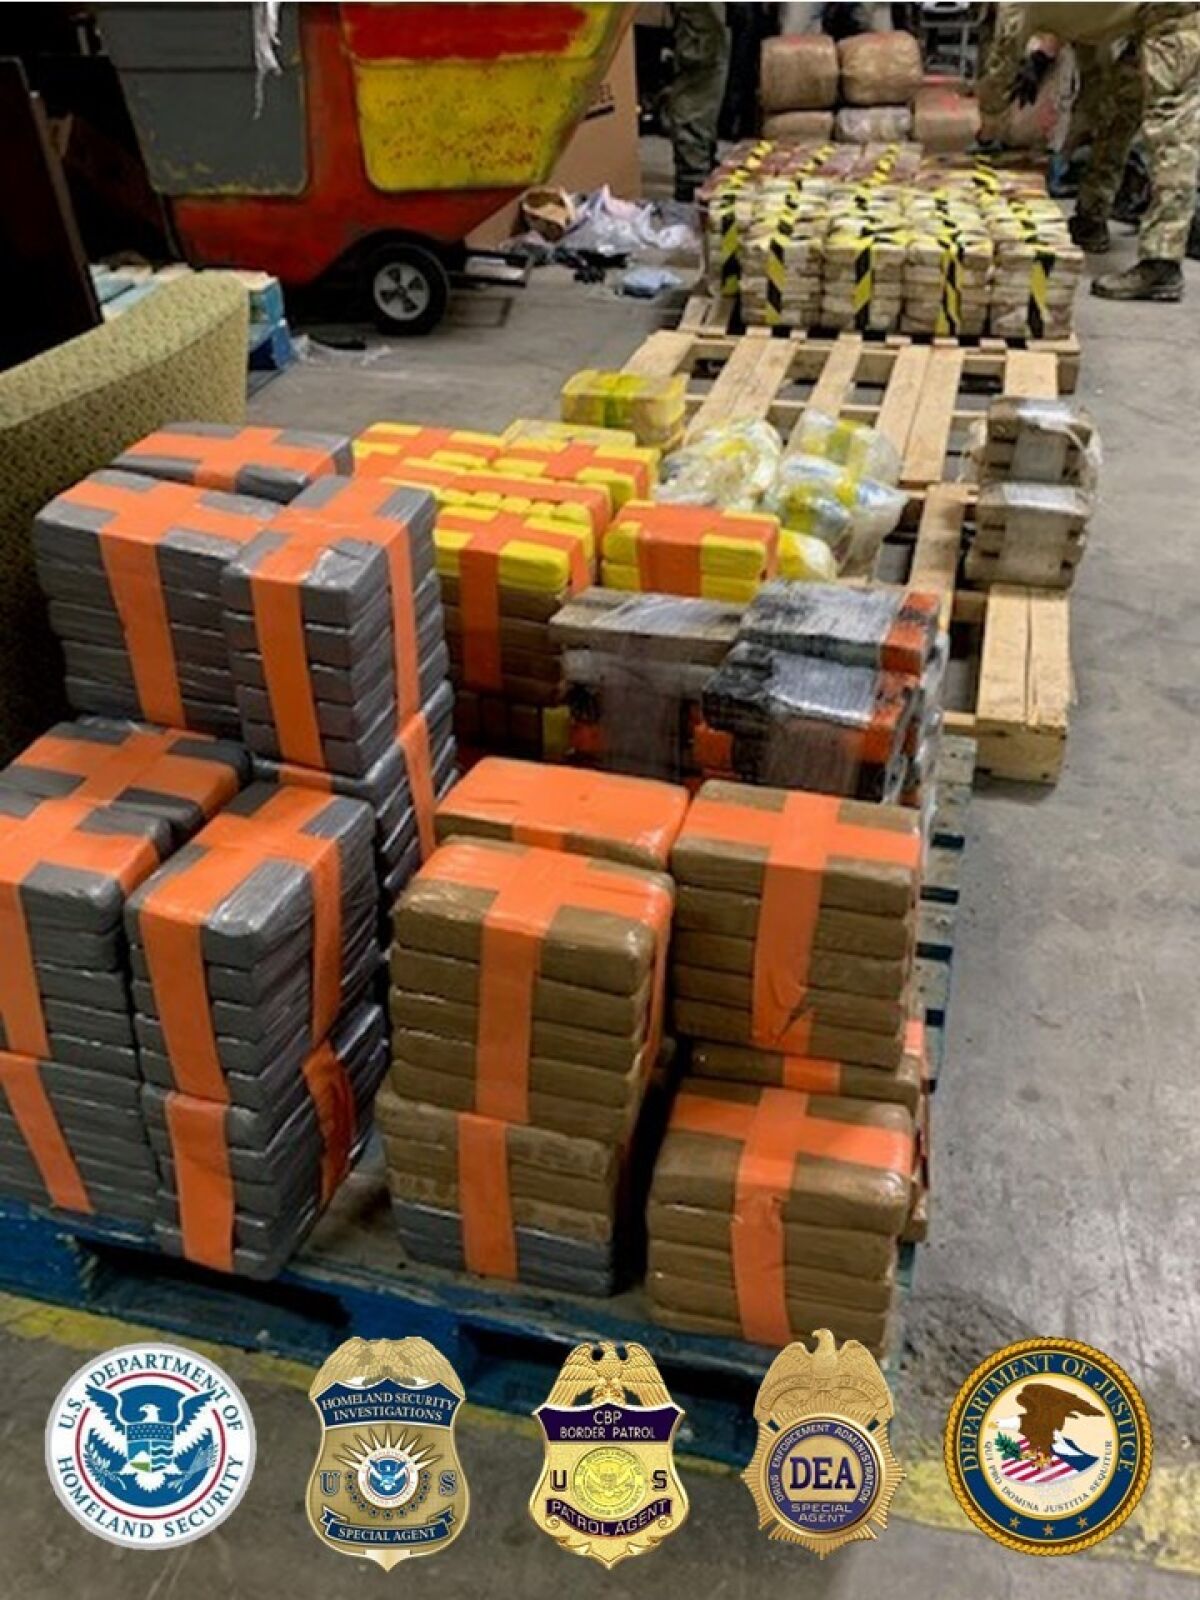 Nearly $30 million worth of five different drugs was seized.